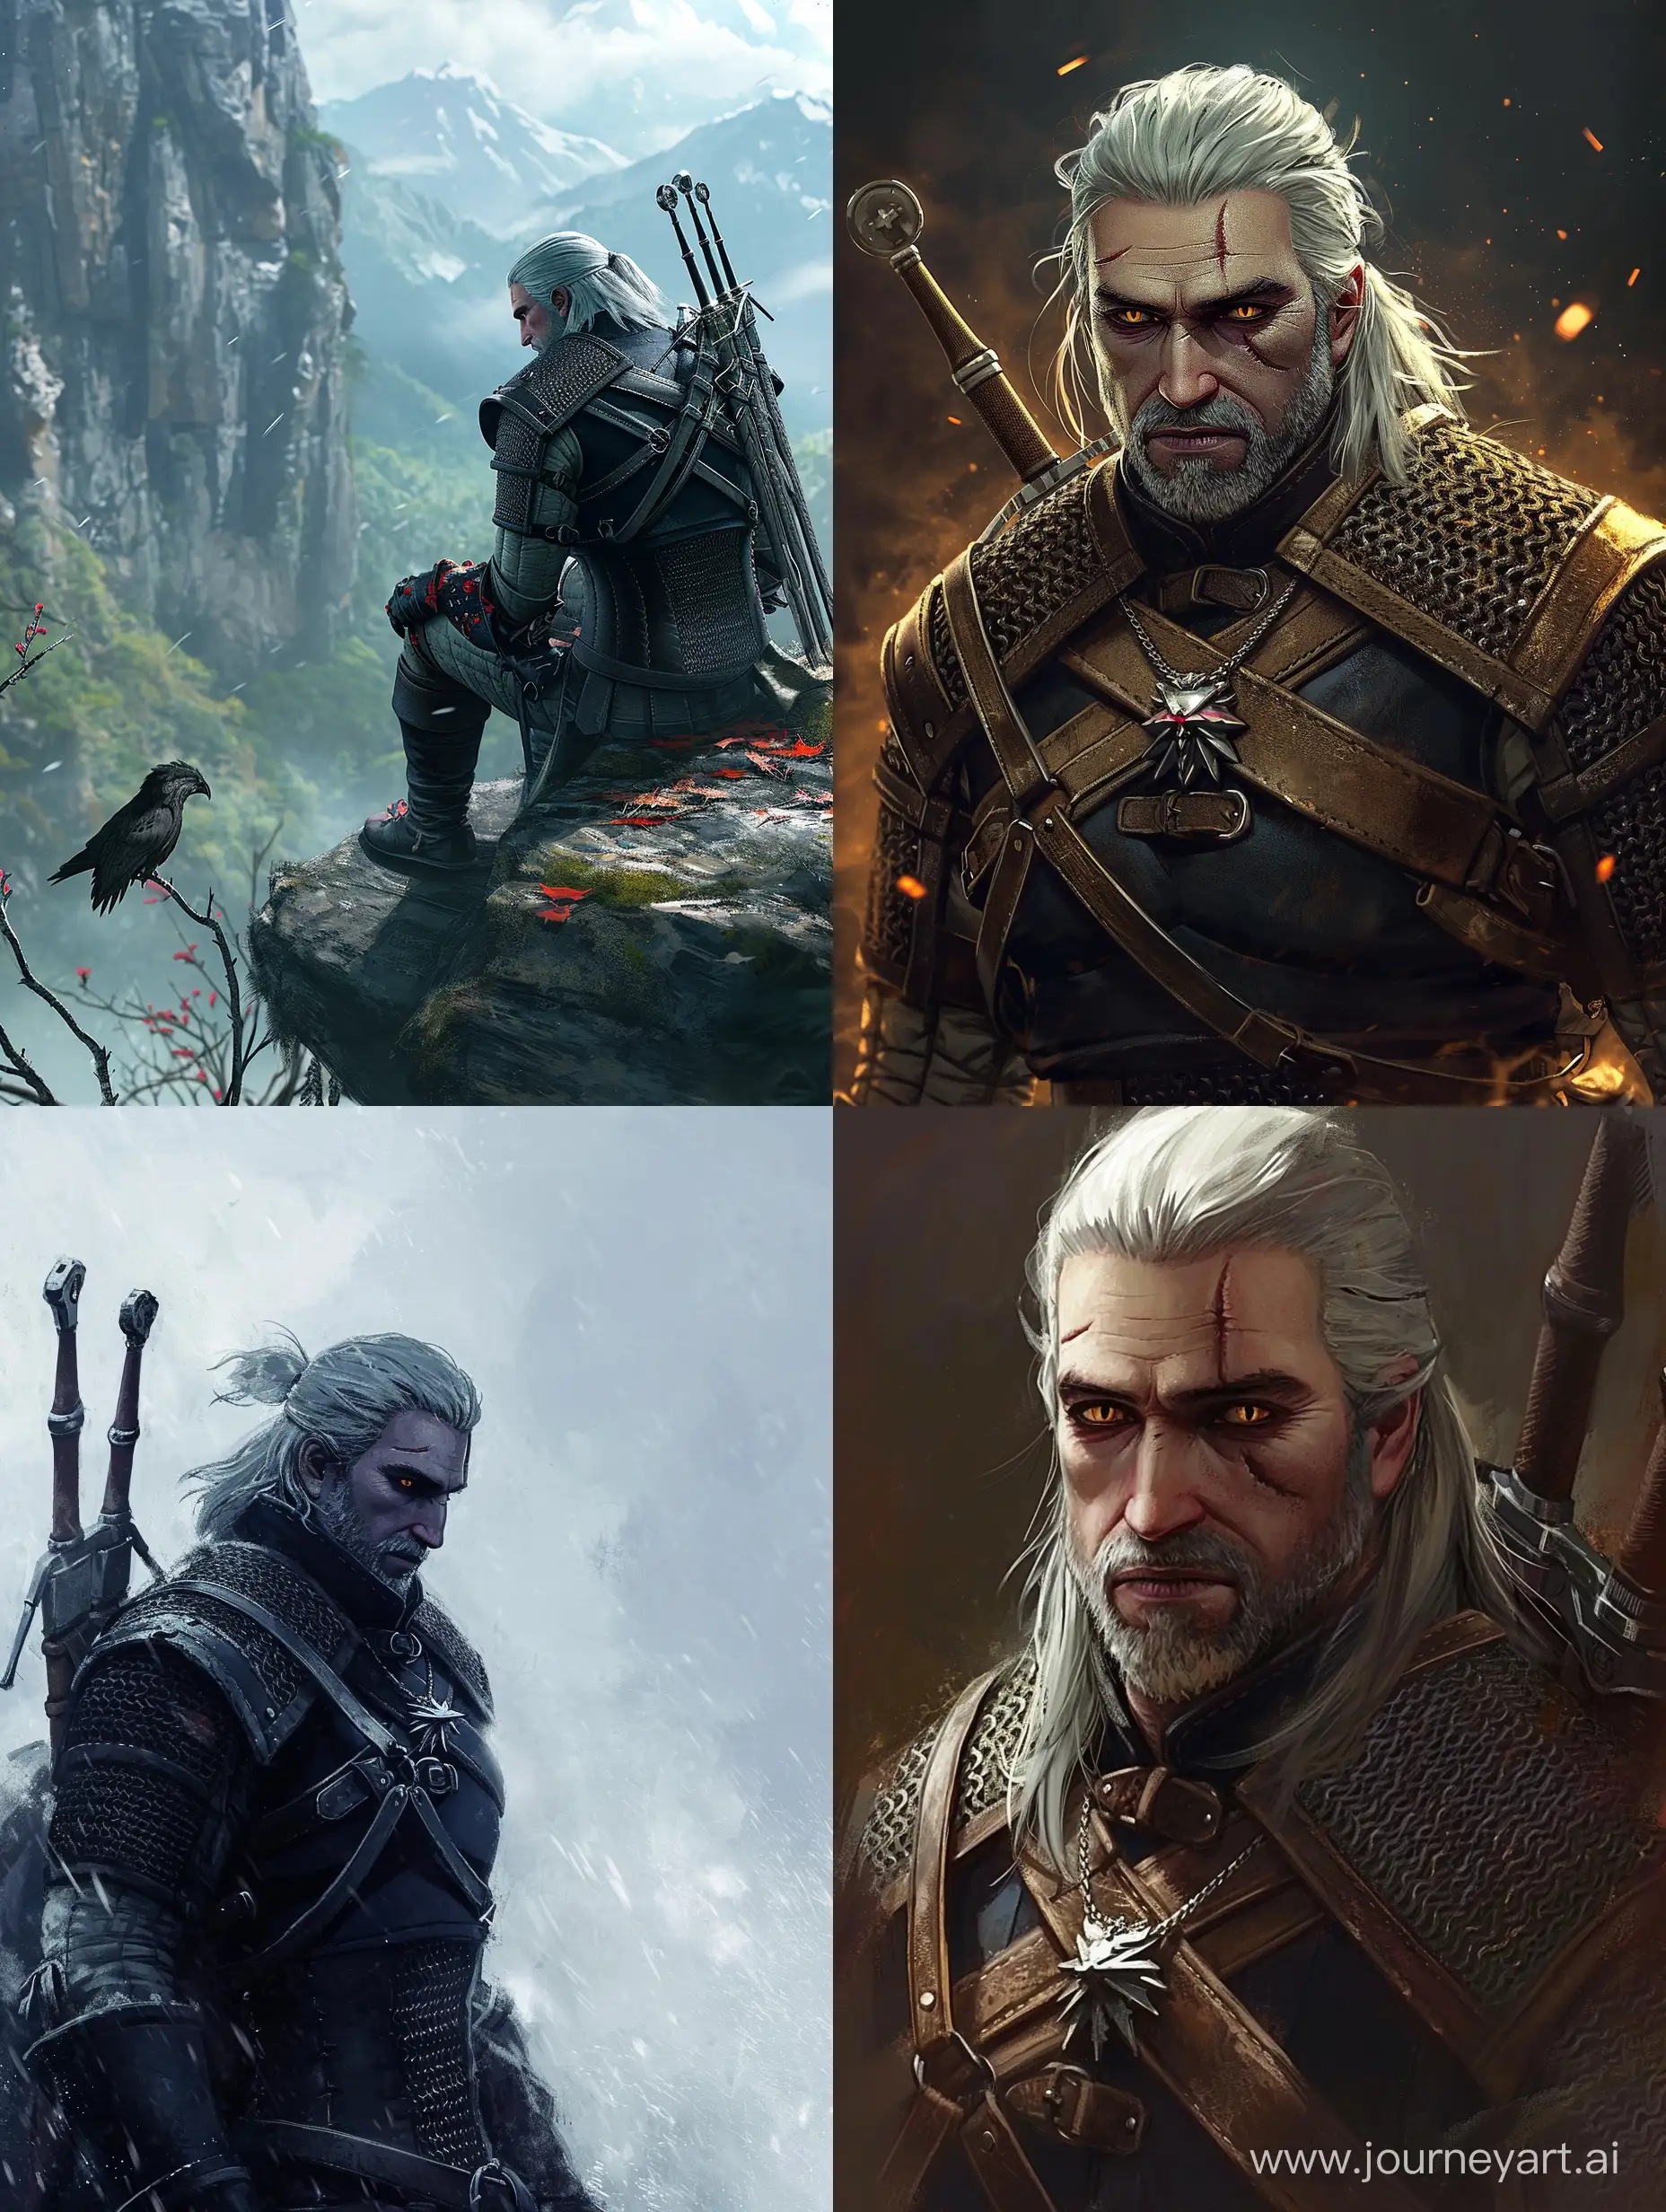 A picture of The Witcher 3 by Studio Ghibli Art Style